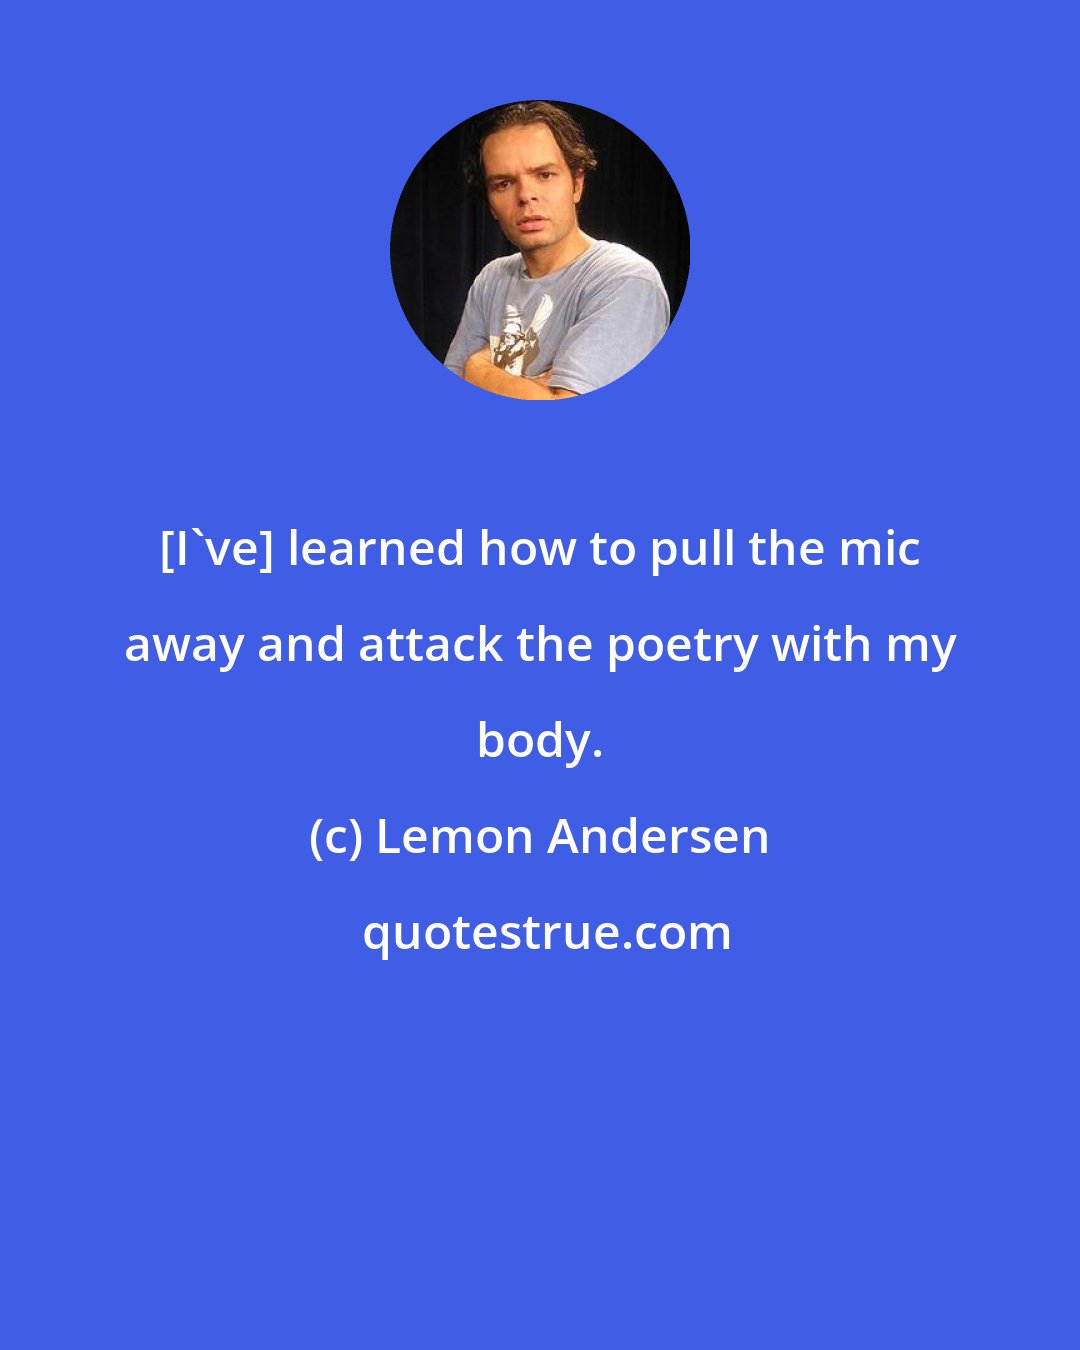 Lemon Andersen: [I've] learned how to pull the mic away and attack the poetry with my body.